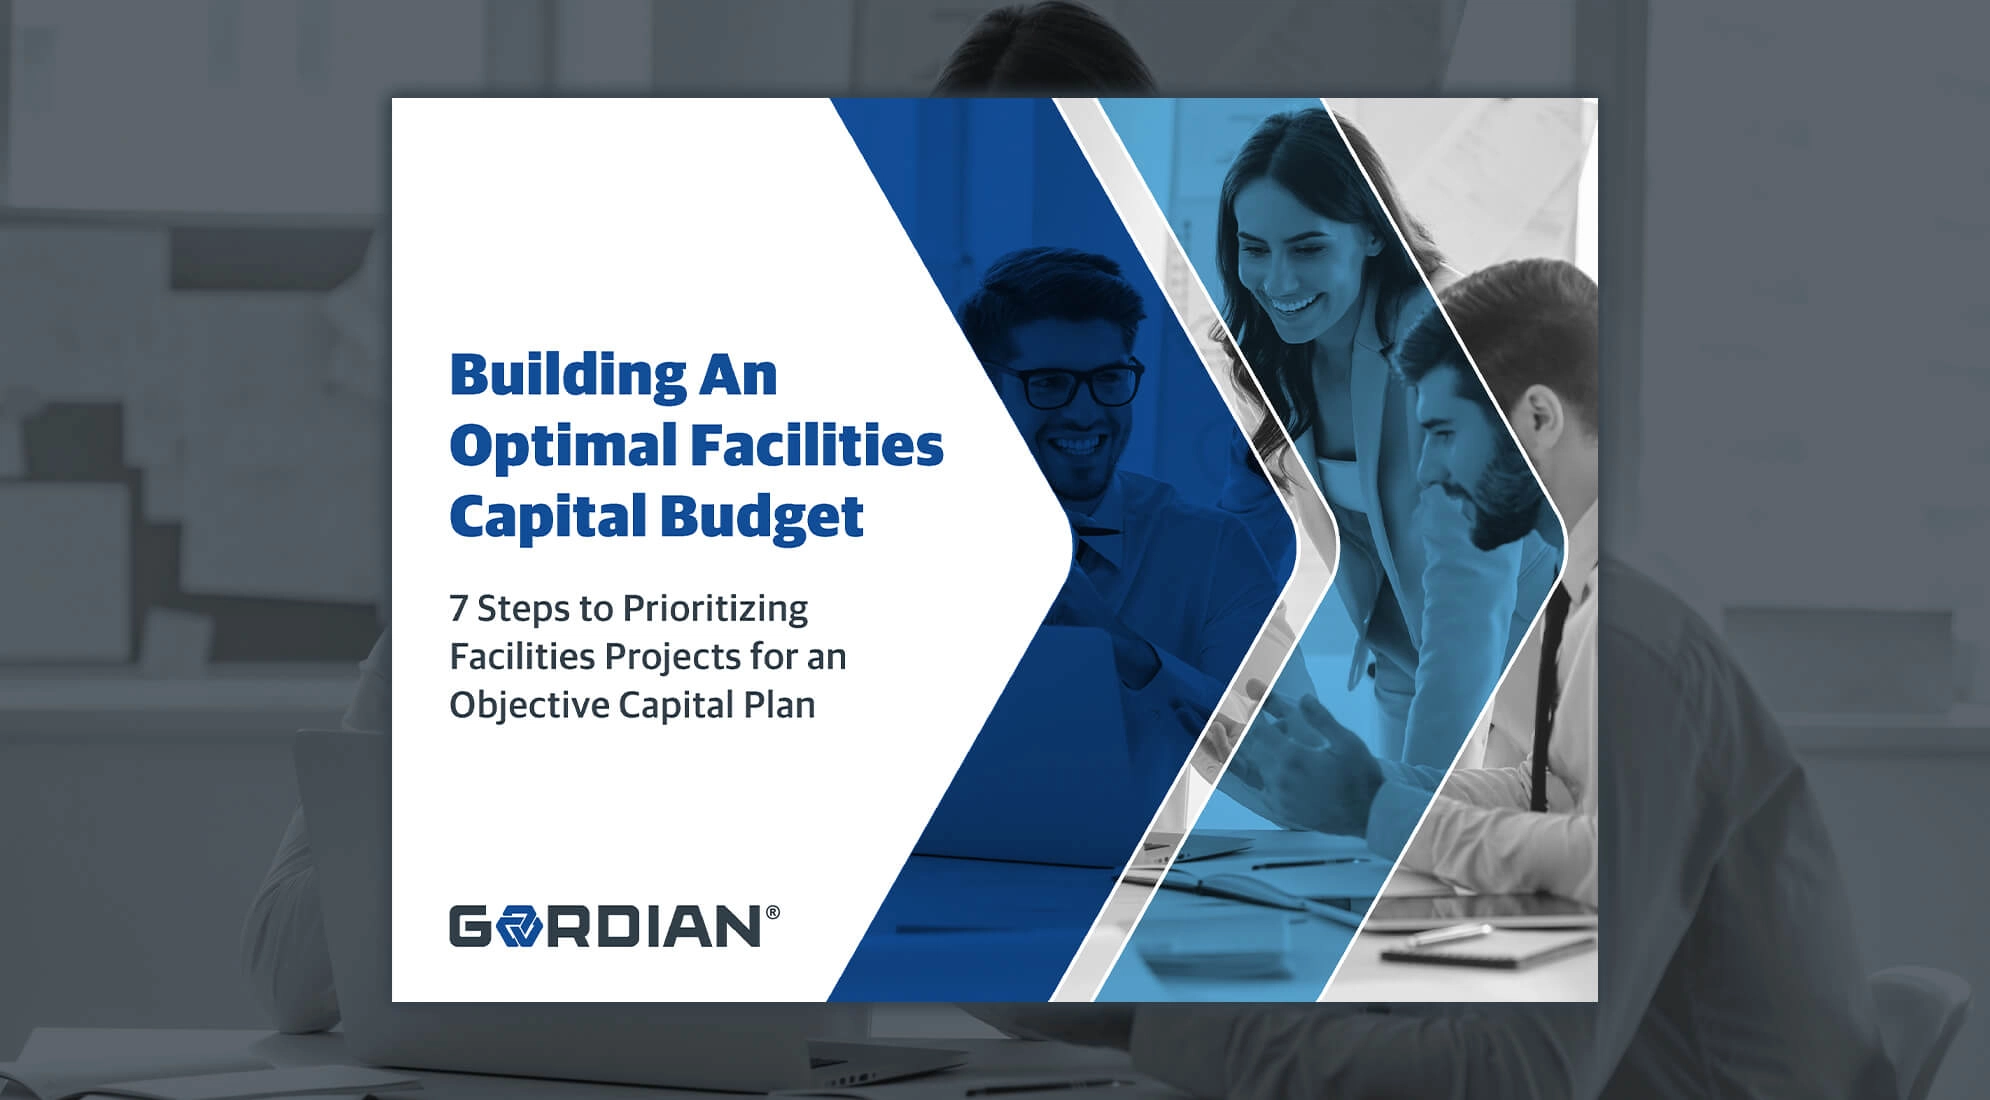 Building an Optimal Facilities Capital Budget: 7 Steps to Prioritizing Facilities Projects for an Objective Capital Plan 3